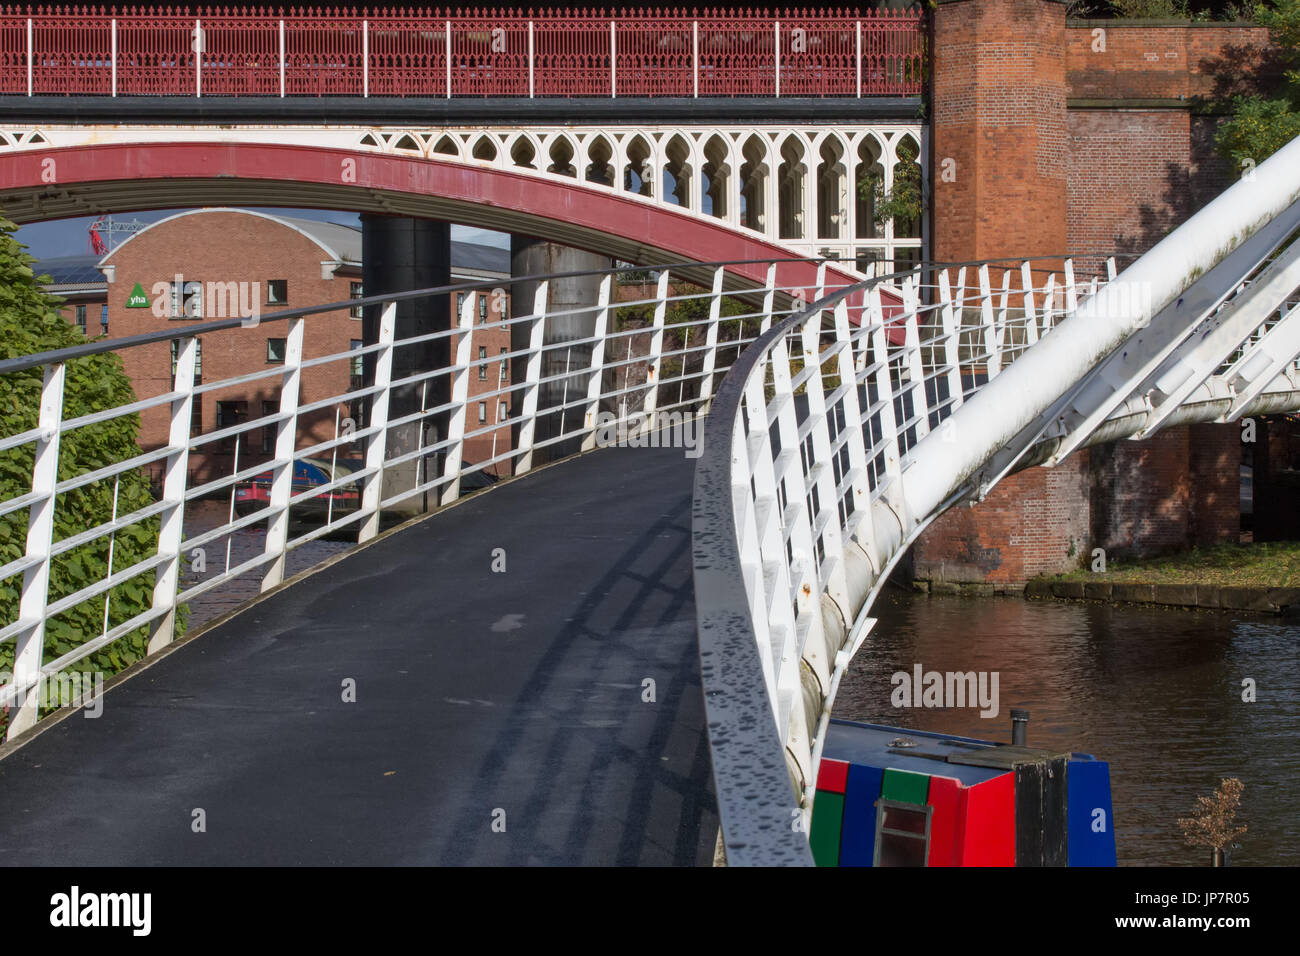 The modern Merchant’s Bridge in Castlefield Basin with the historical Victorian Rail Viaduct behind. Stock Photo